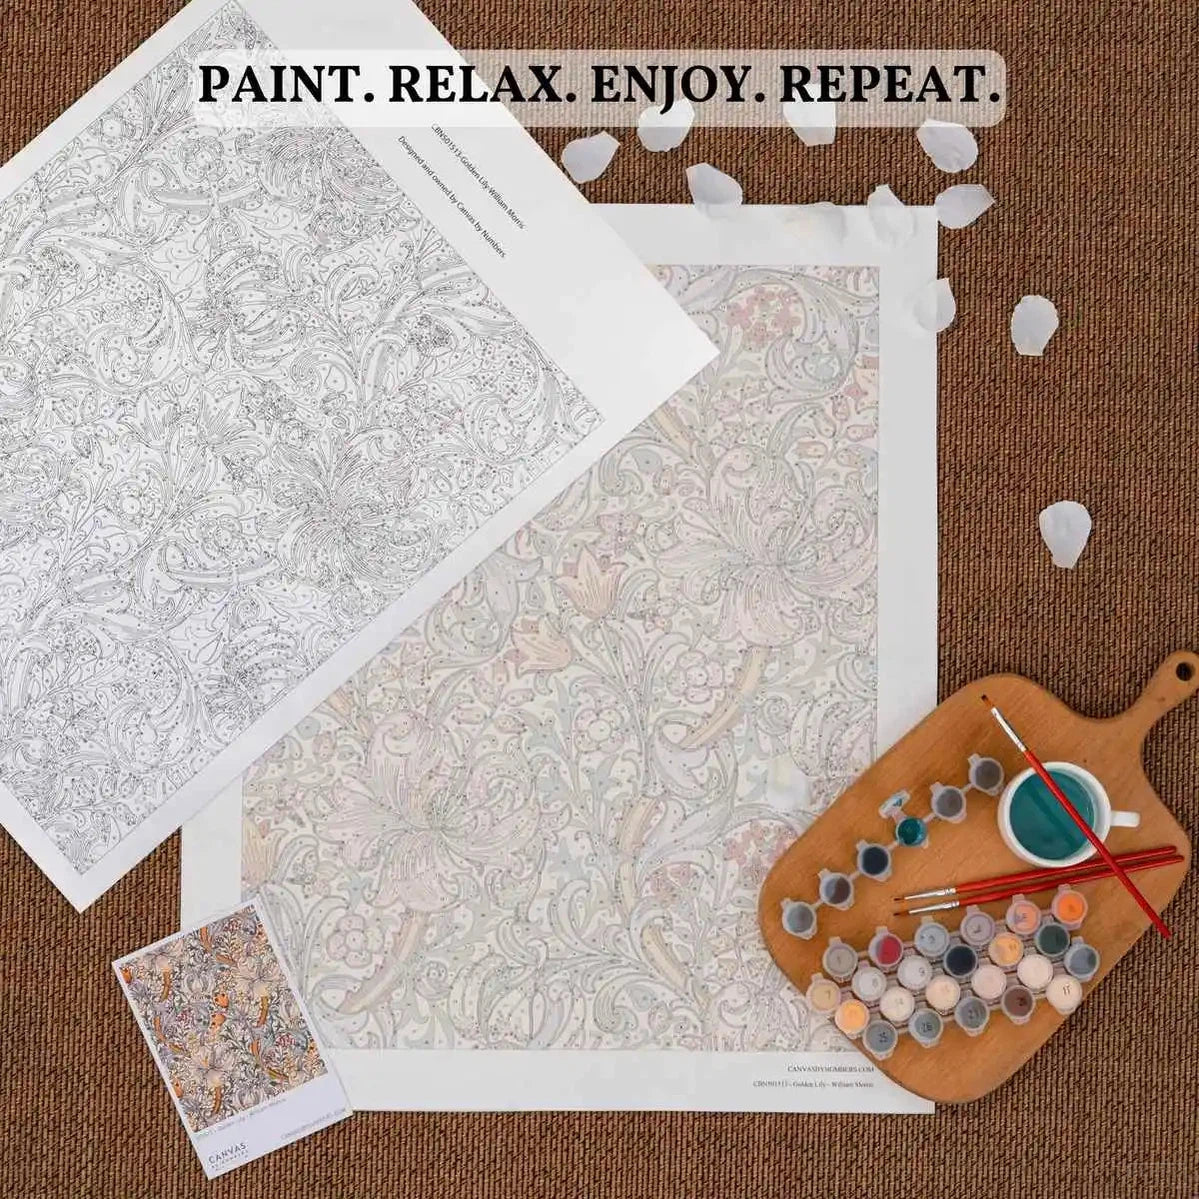 Impression Sunrise - Paint by Numbers-You'll love our Impression Sunrise - Claude Monet paint by numbers kit. Up to 50% Off! Free shipping and 60 days money-back. Shop at Canvas by Numbers. -Canvas by Numbers